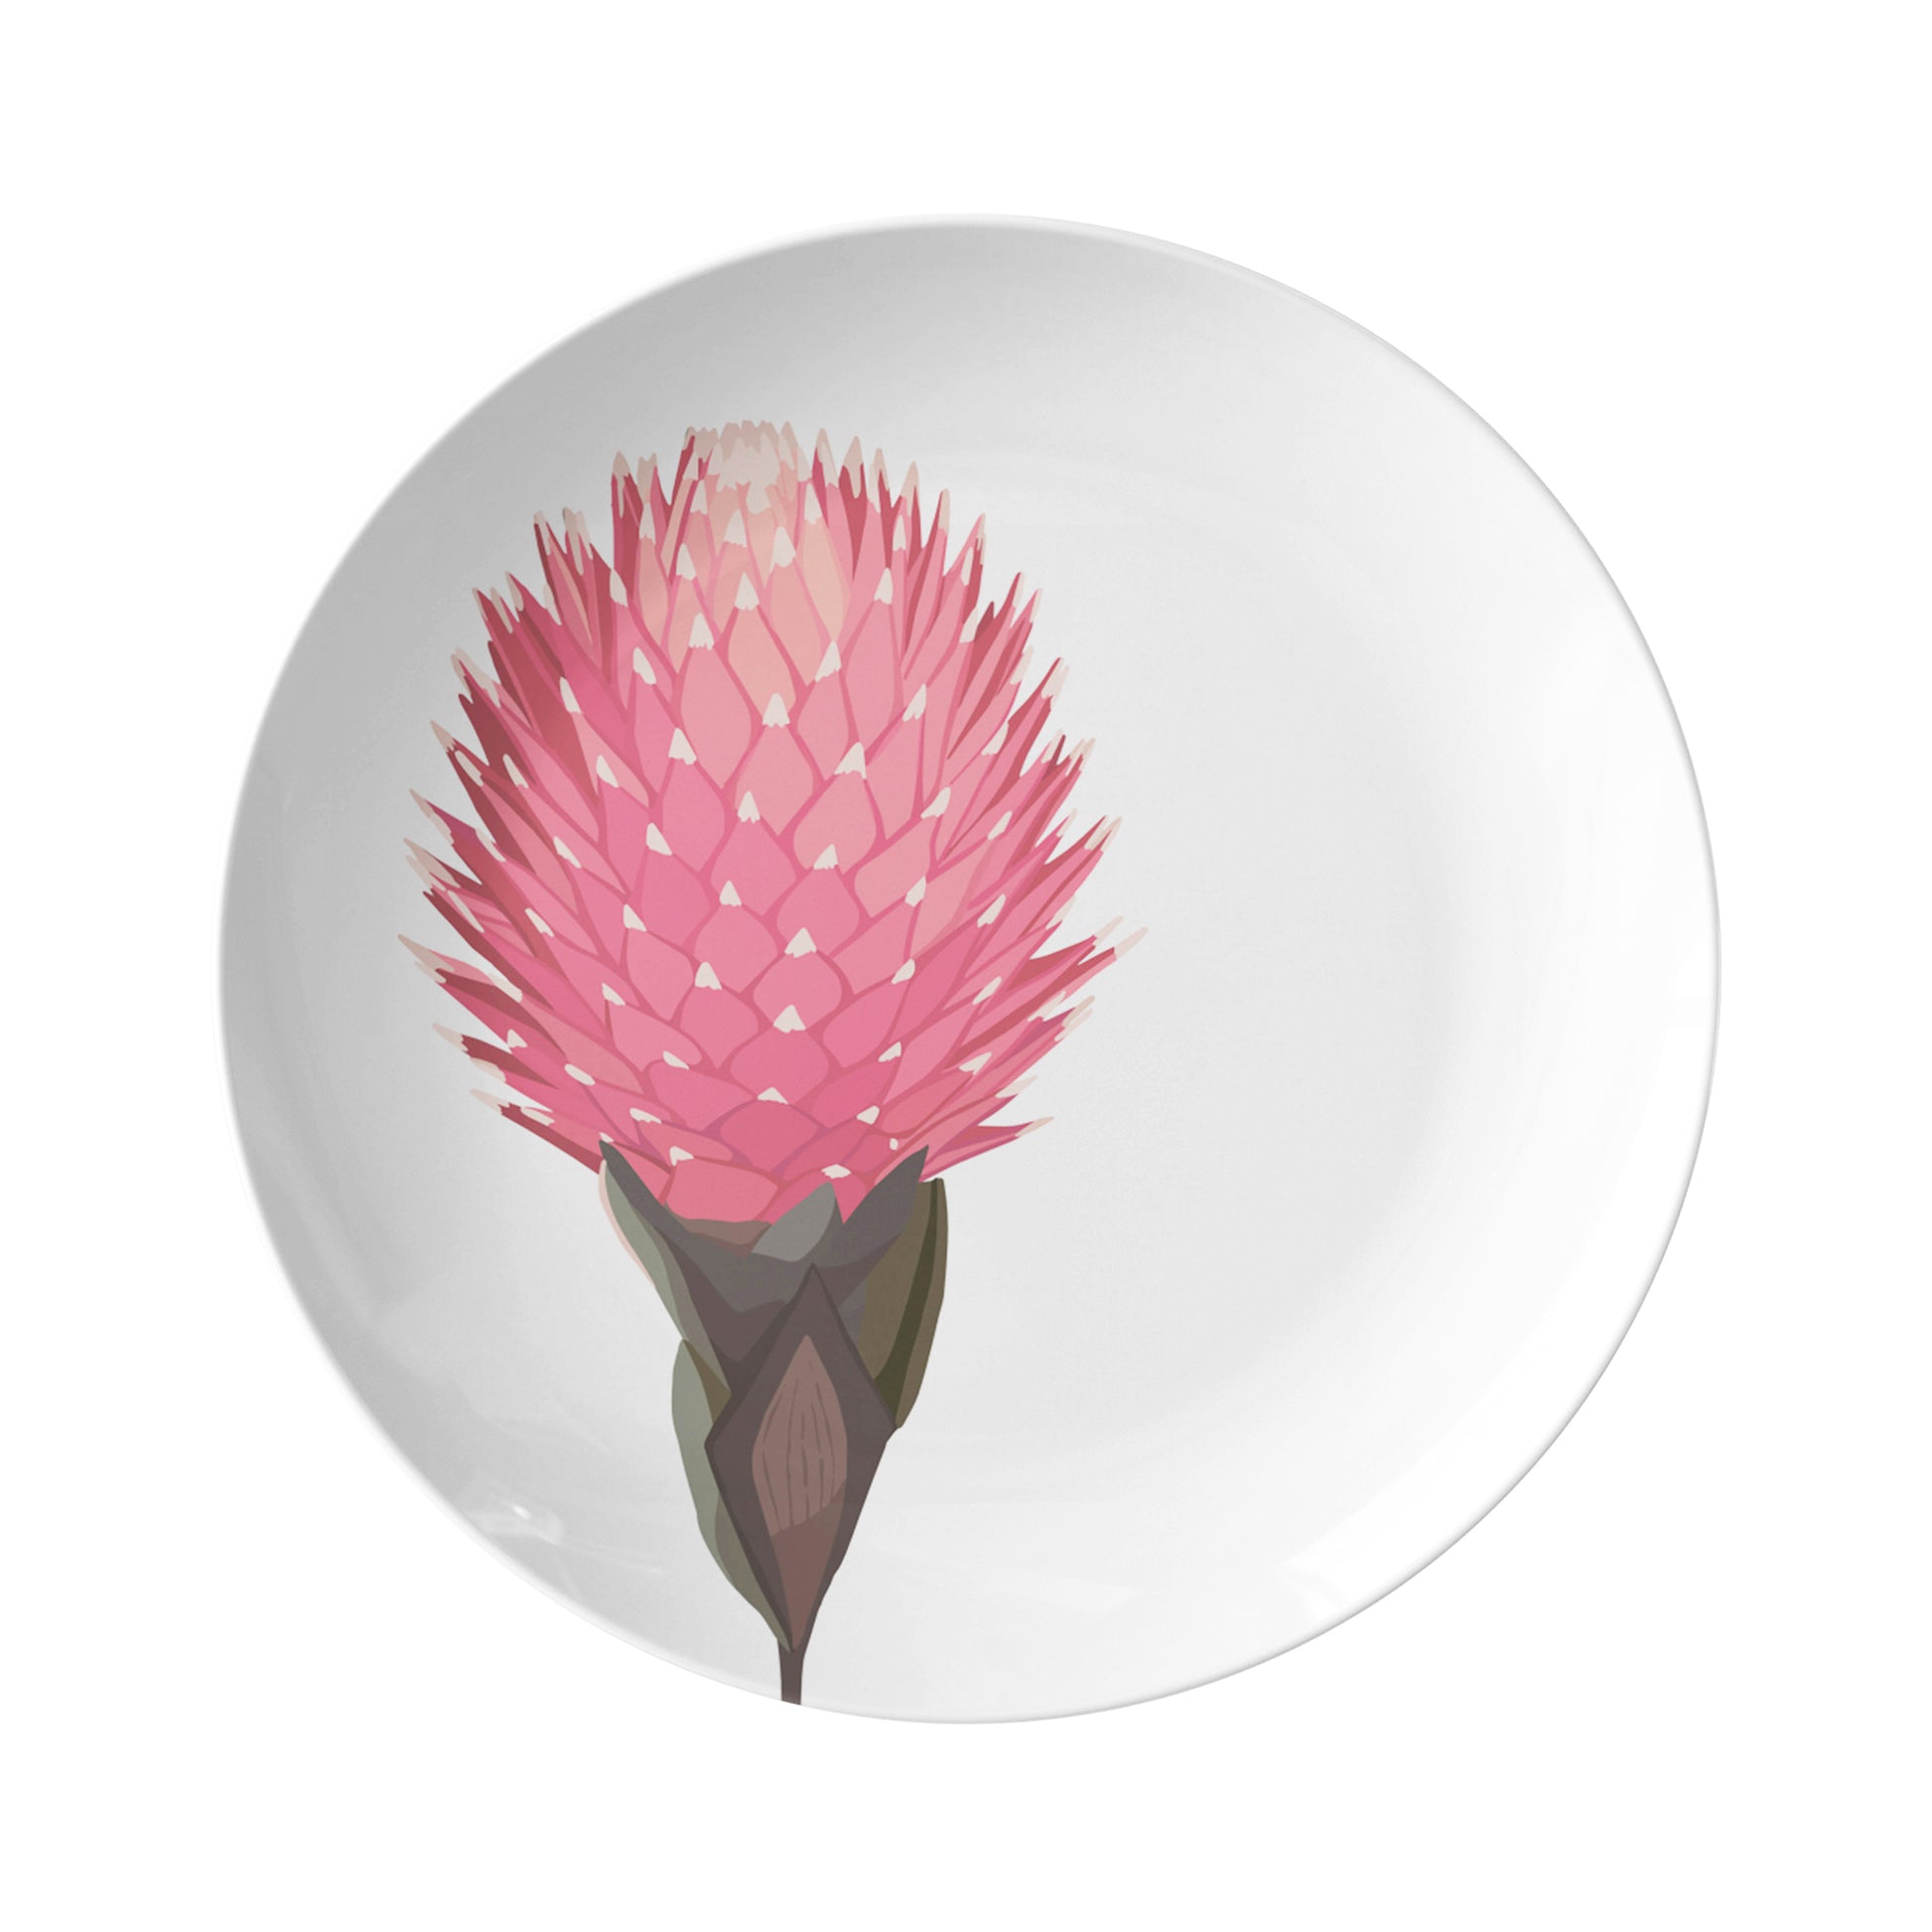 Pink protea flower plate